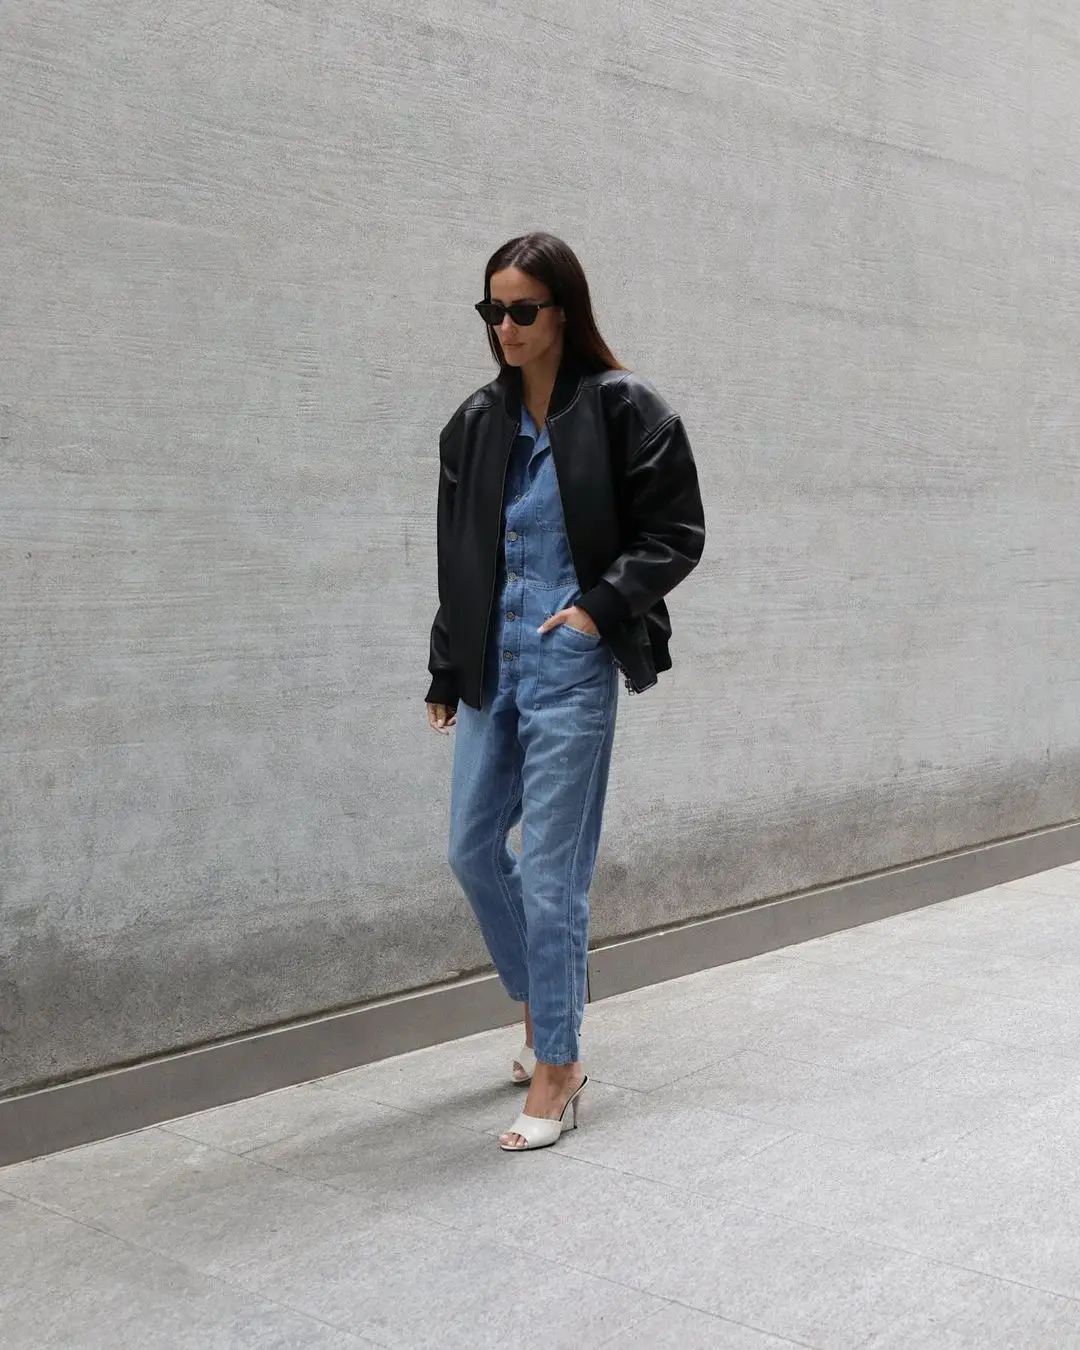 8 Adorable  Denim Clothes Every Woman Should Own ...